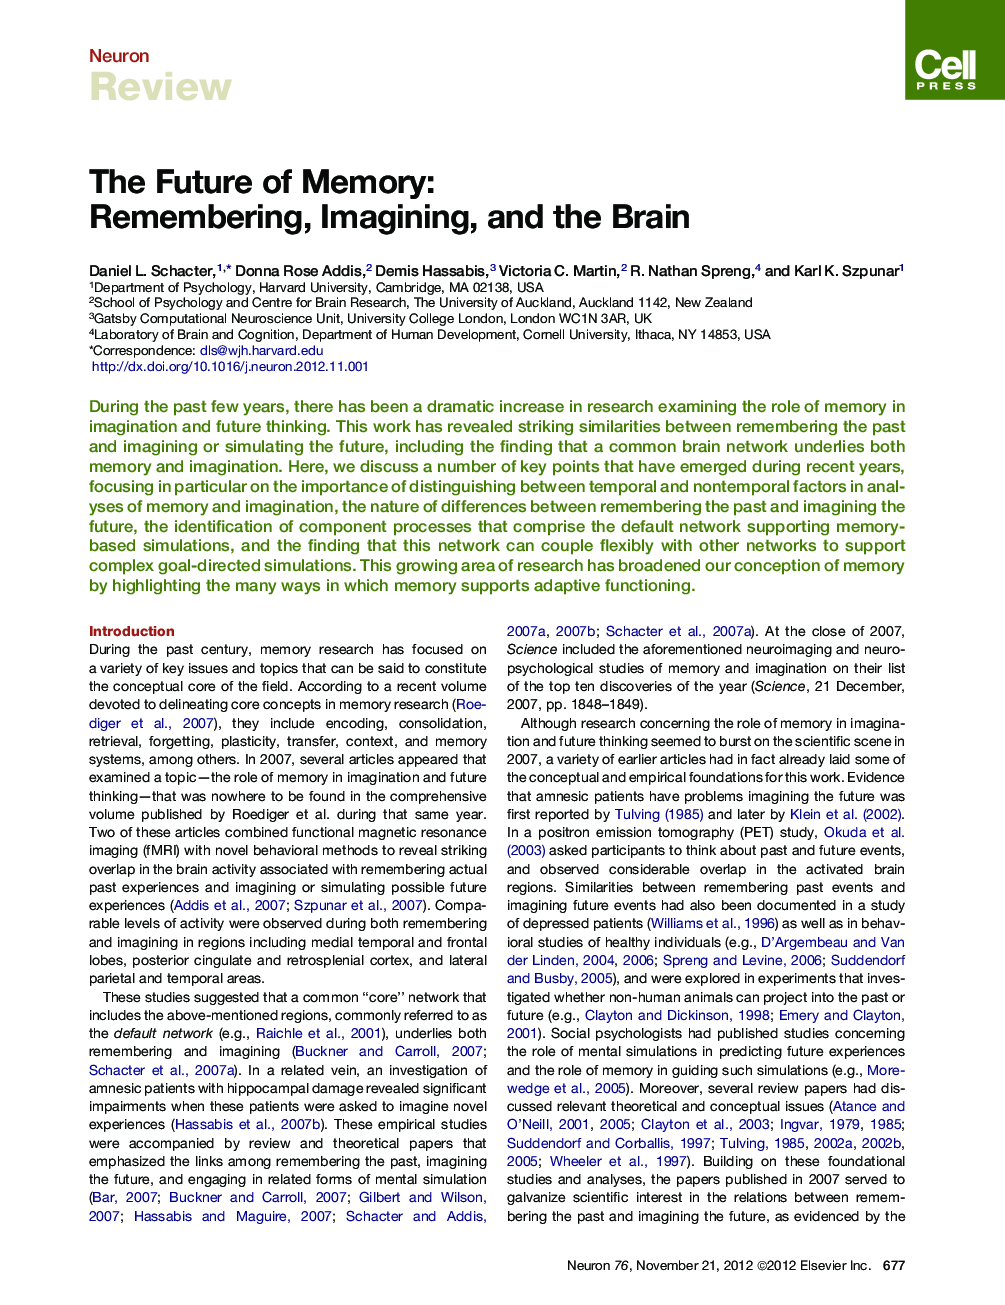 The Future of Memory: Remembering, Imagining, and the Brain